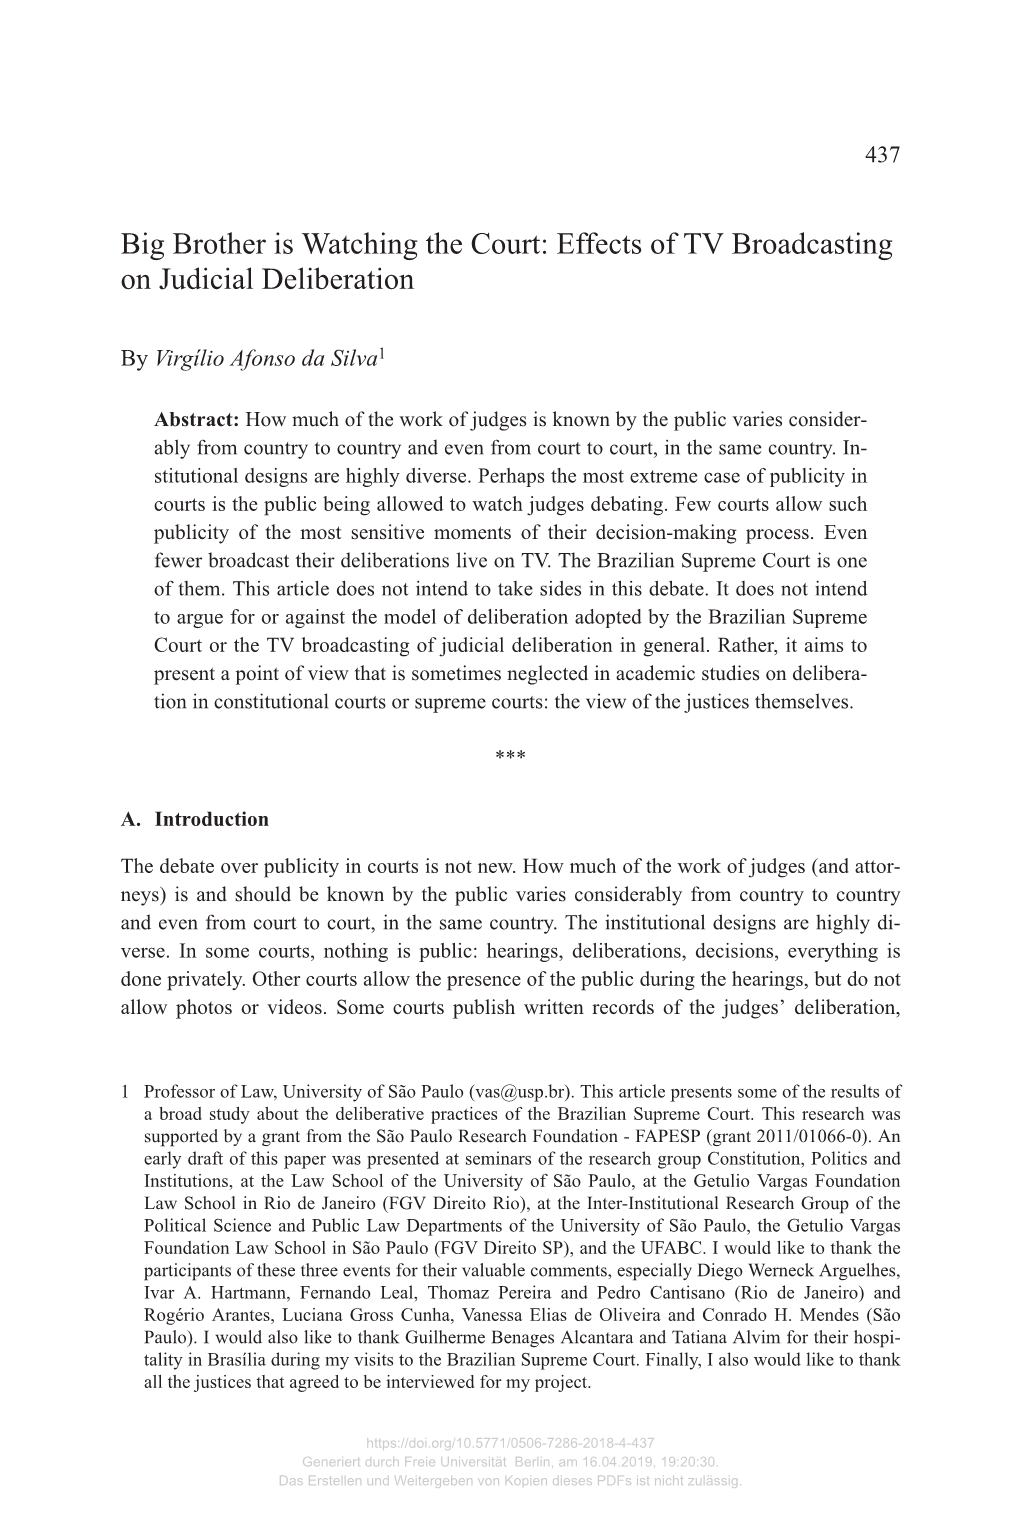 Big Brother Is Watching the Court: Effects of TV Broadcasting on Judicial Deliberation